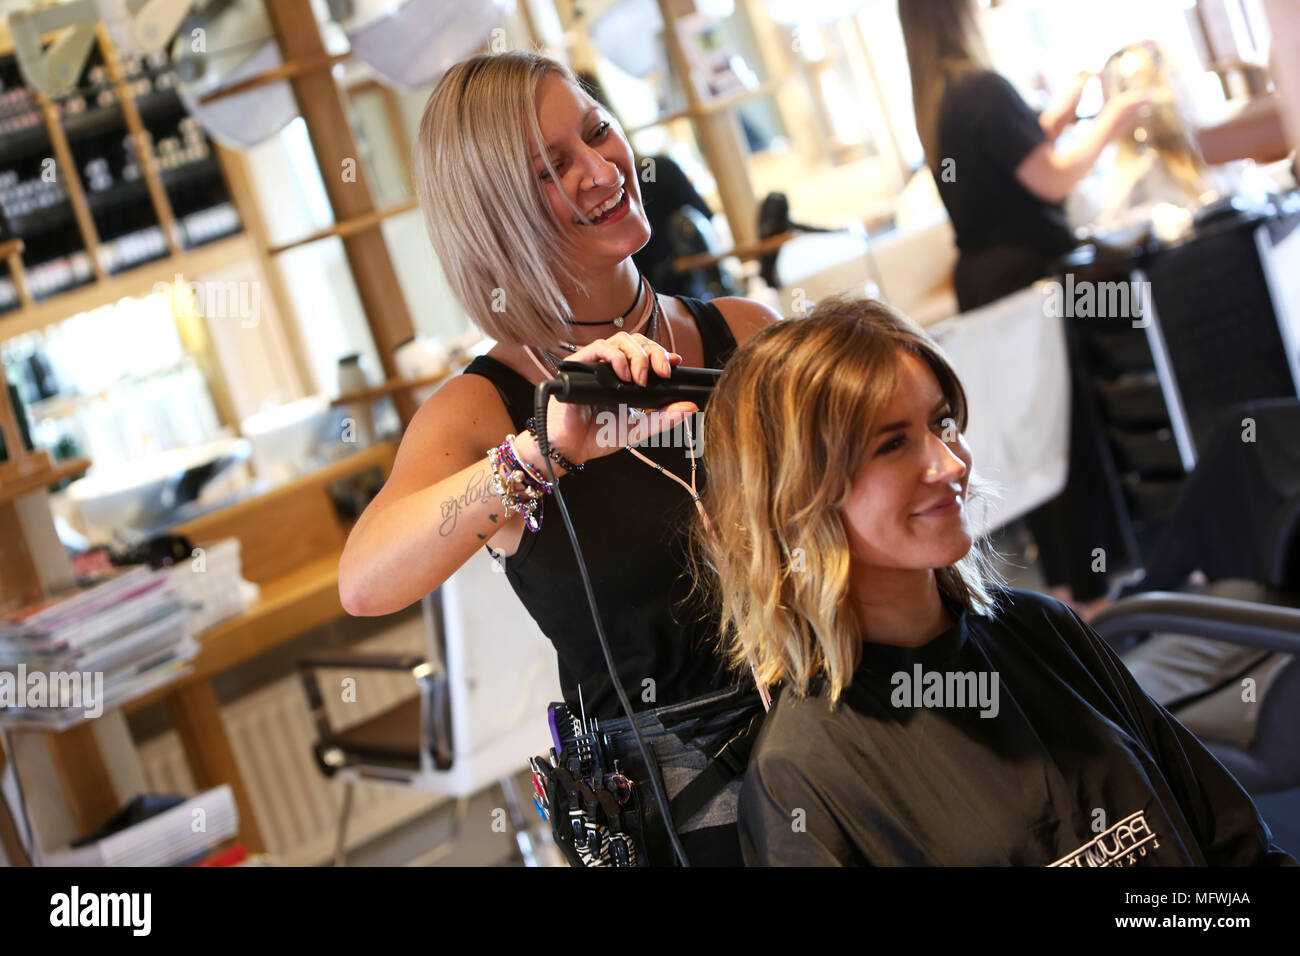 A hairdresser pictured attending to a young girls hair at a hairdressers in Chichester, West Sussex, UK. Stock Photo